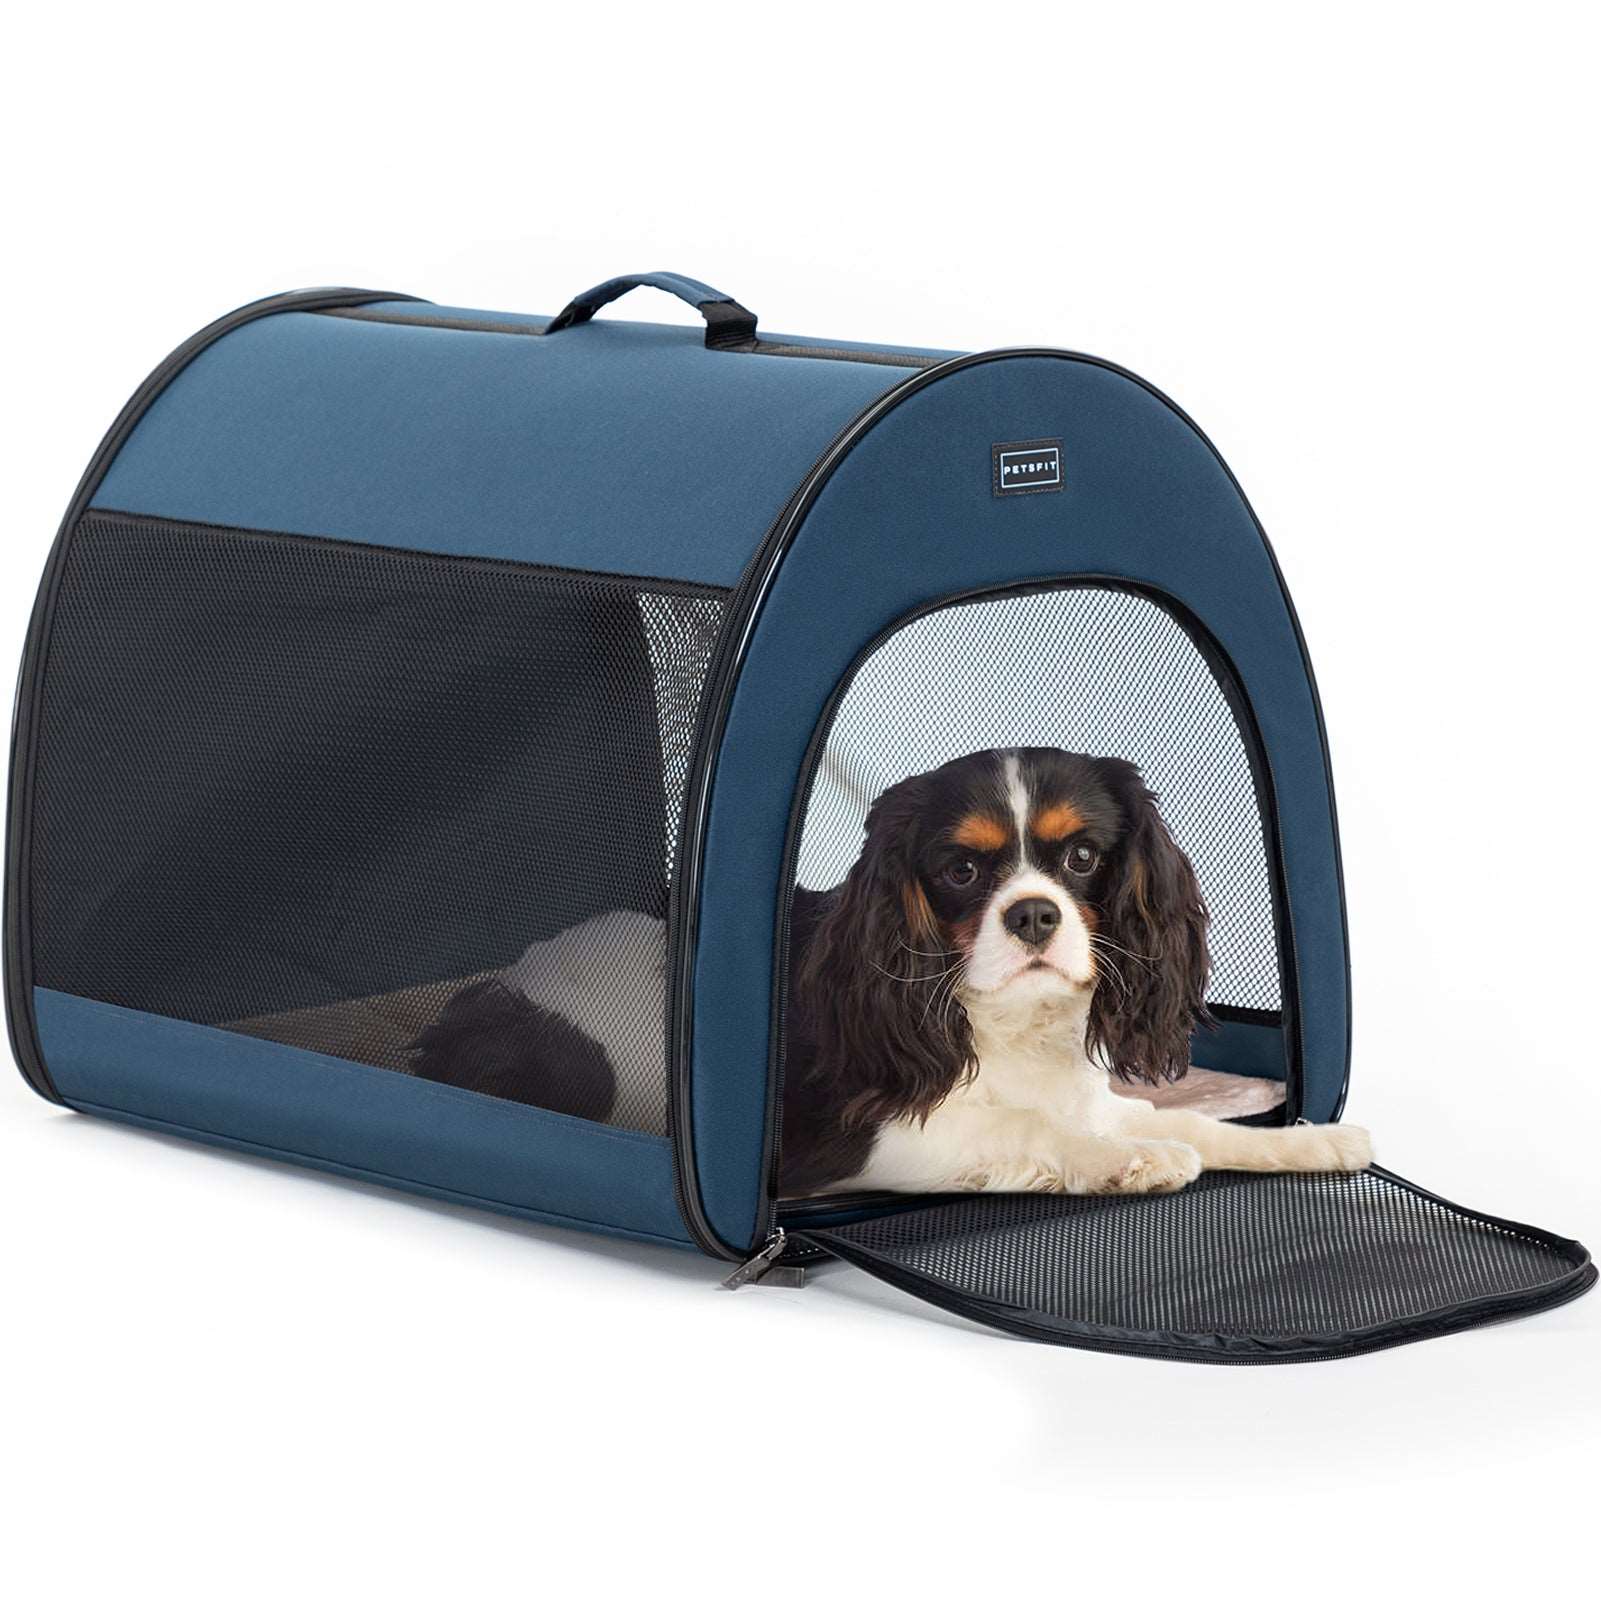 Petsfit-Arch-Design-Soft-Sided-Portable-Dog-Crate-09